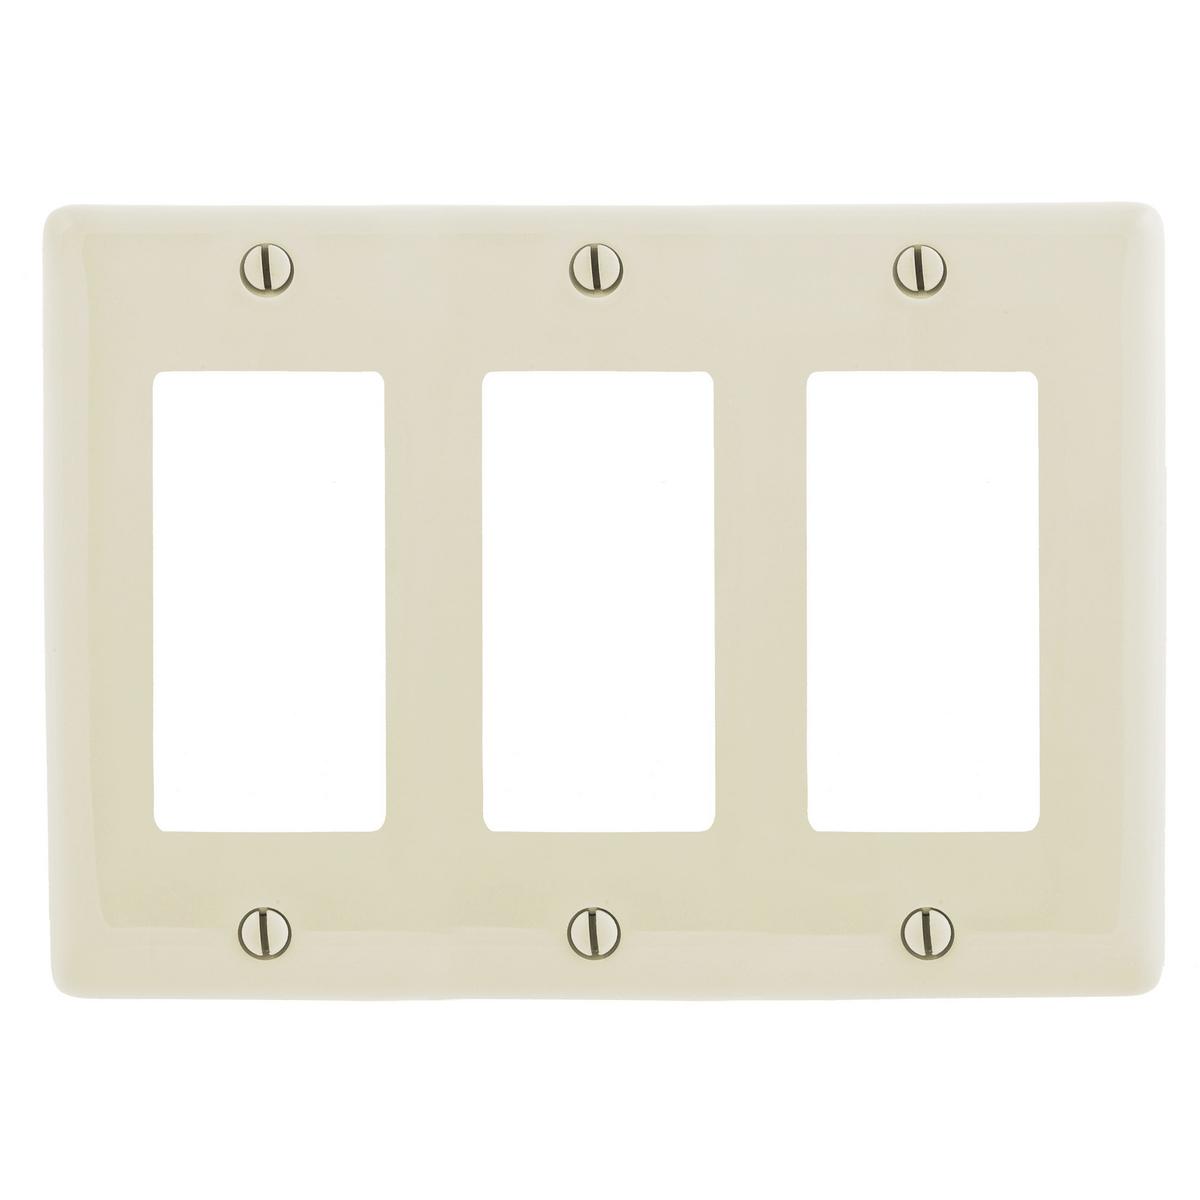 Hubbell NP263LA Wallplates and Box Covers, Wallplate, Nylon, 3-Gang, 3) Decorator, Light Almond  ; Reinforcement ribs for extra strength ; Captive screw feature holds mounting screw in place ; High-impact, self-extinguishing nylon material ; Standard Size is 1/8" larger 